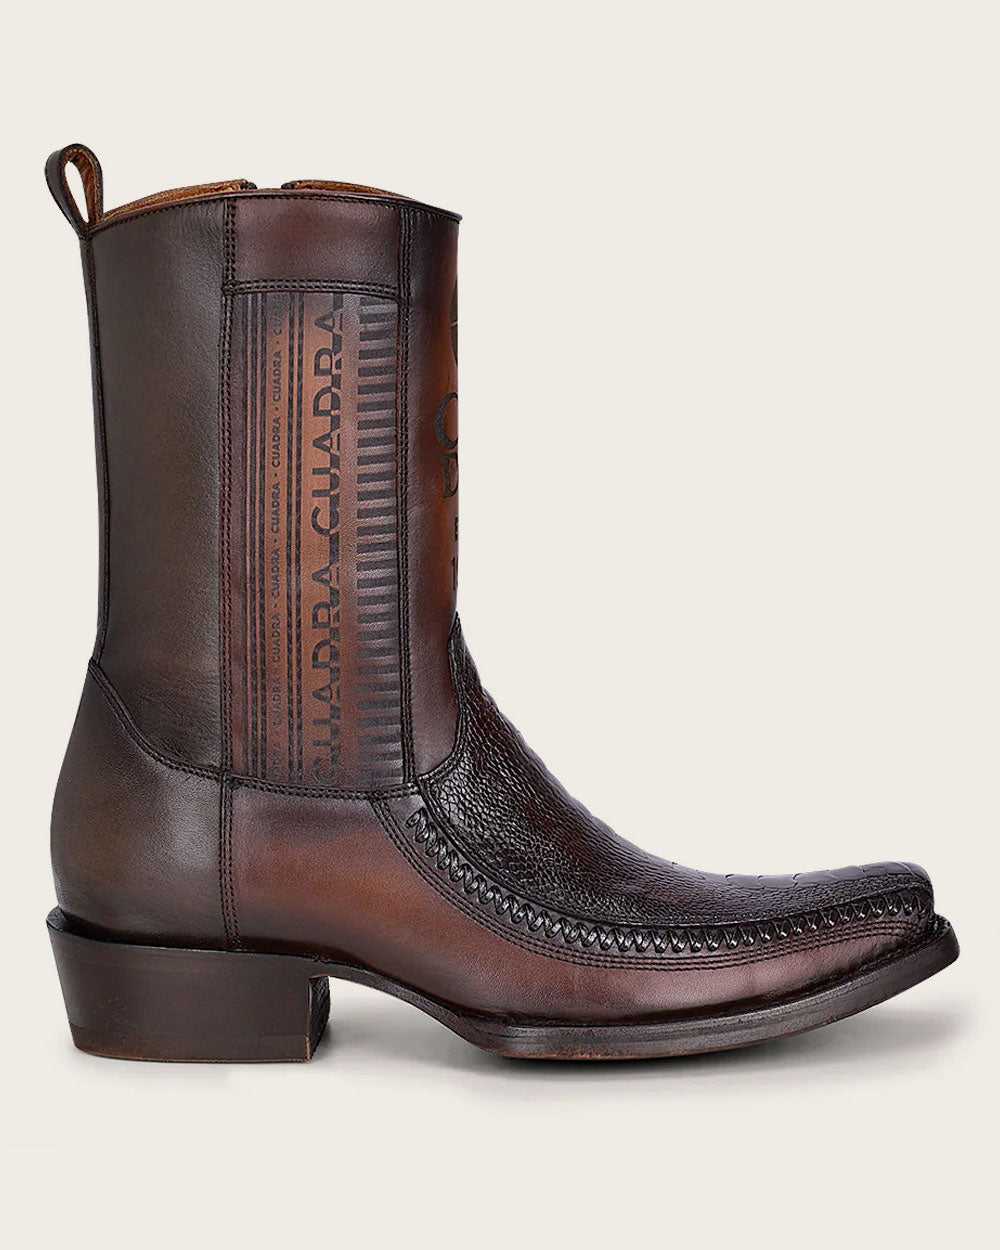 Standout Boots: Step up your footwear game with Cuadra's traditional style. 